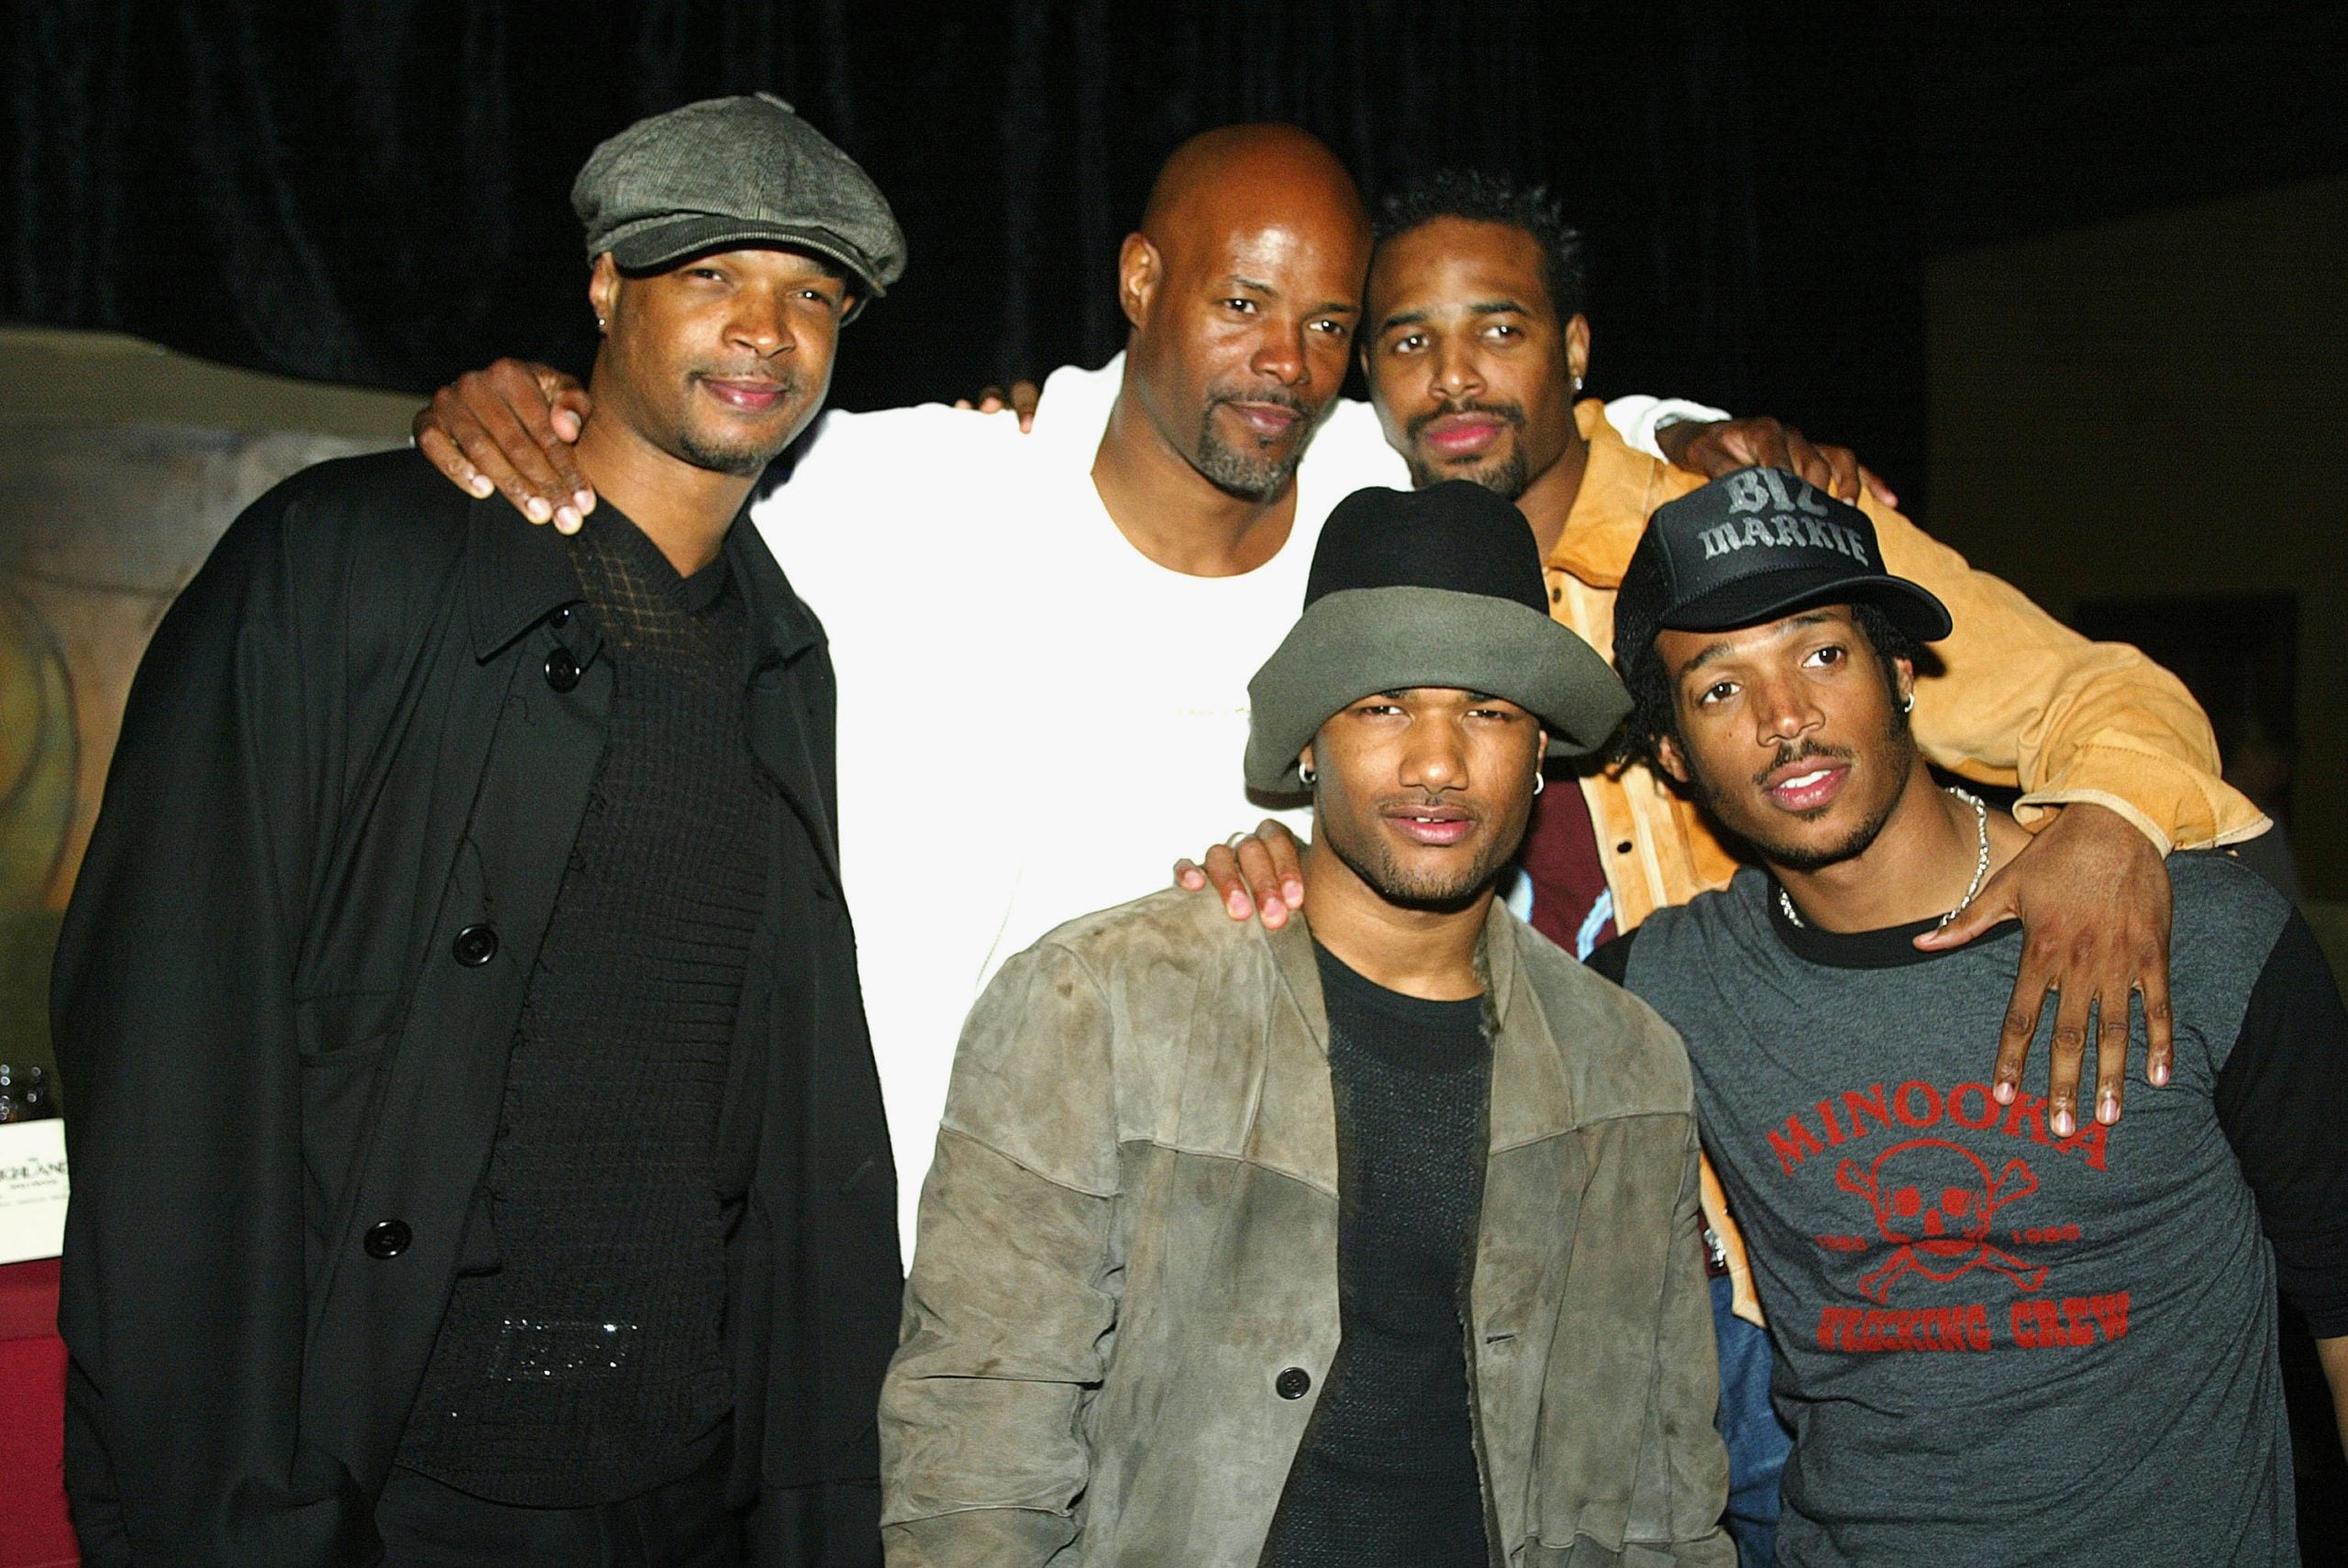 16 Photos Of The Wayans Family Being Black Hollywood Royalty